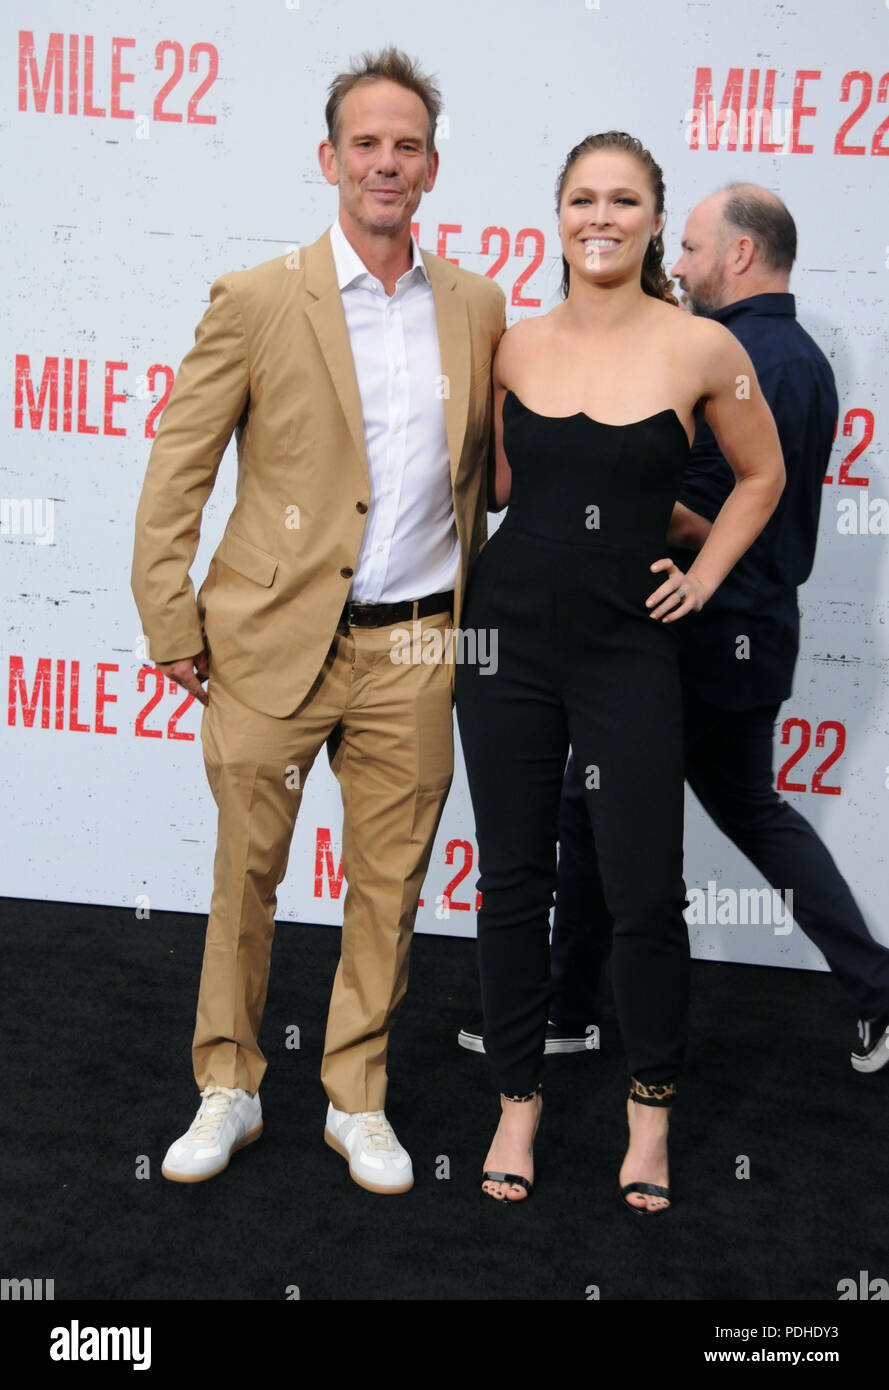 WESTWOOD, CA - AUGUST 09: Director Peter Berg and actress Ronda Rousey attend the premiere of STX Films' 'Mile 22' on August 9, 2018 at Mann Village Theatre in Westwood, California. Photo by Barry King/Alamy Live News Stock Photo